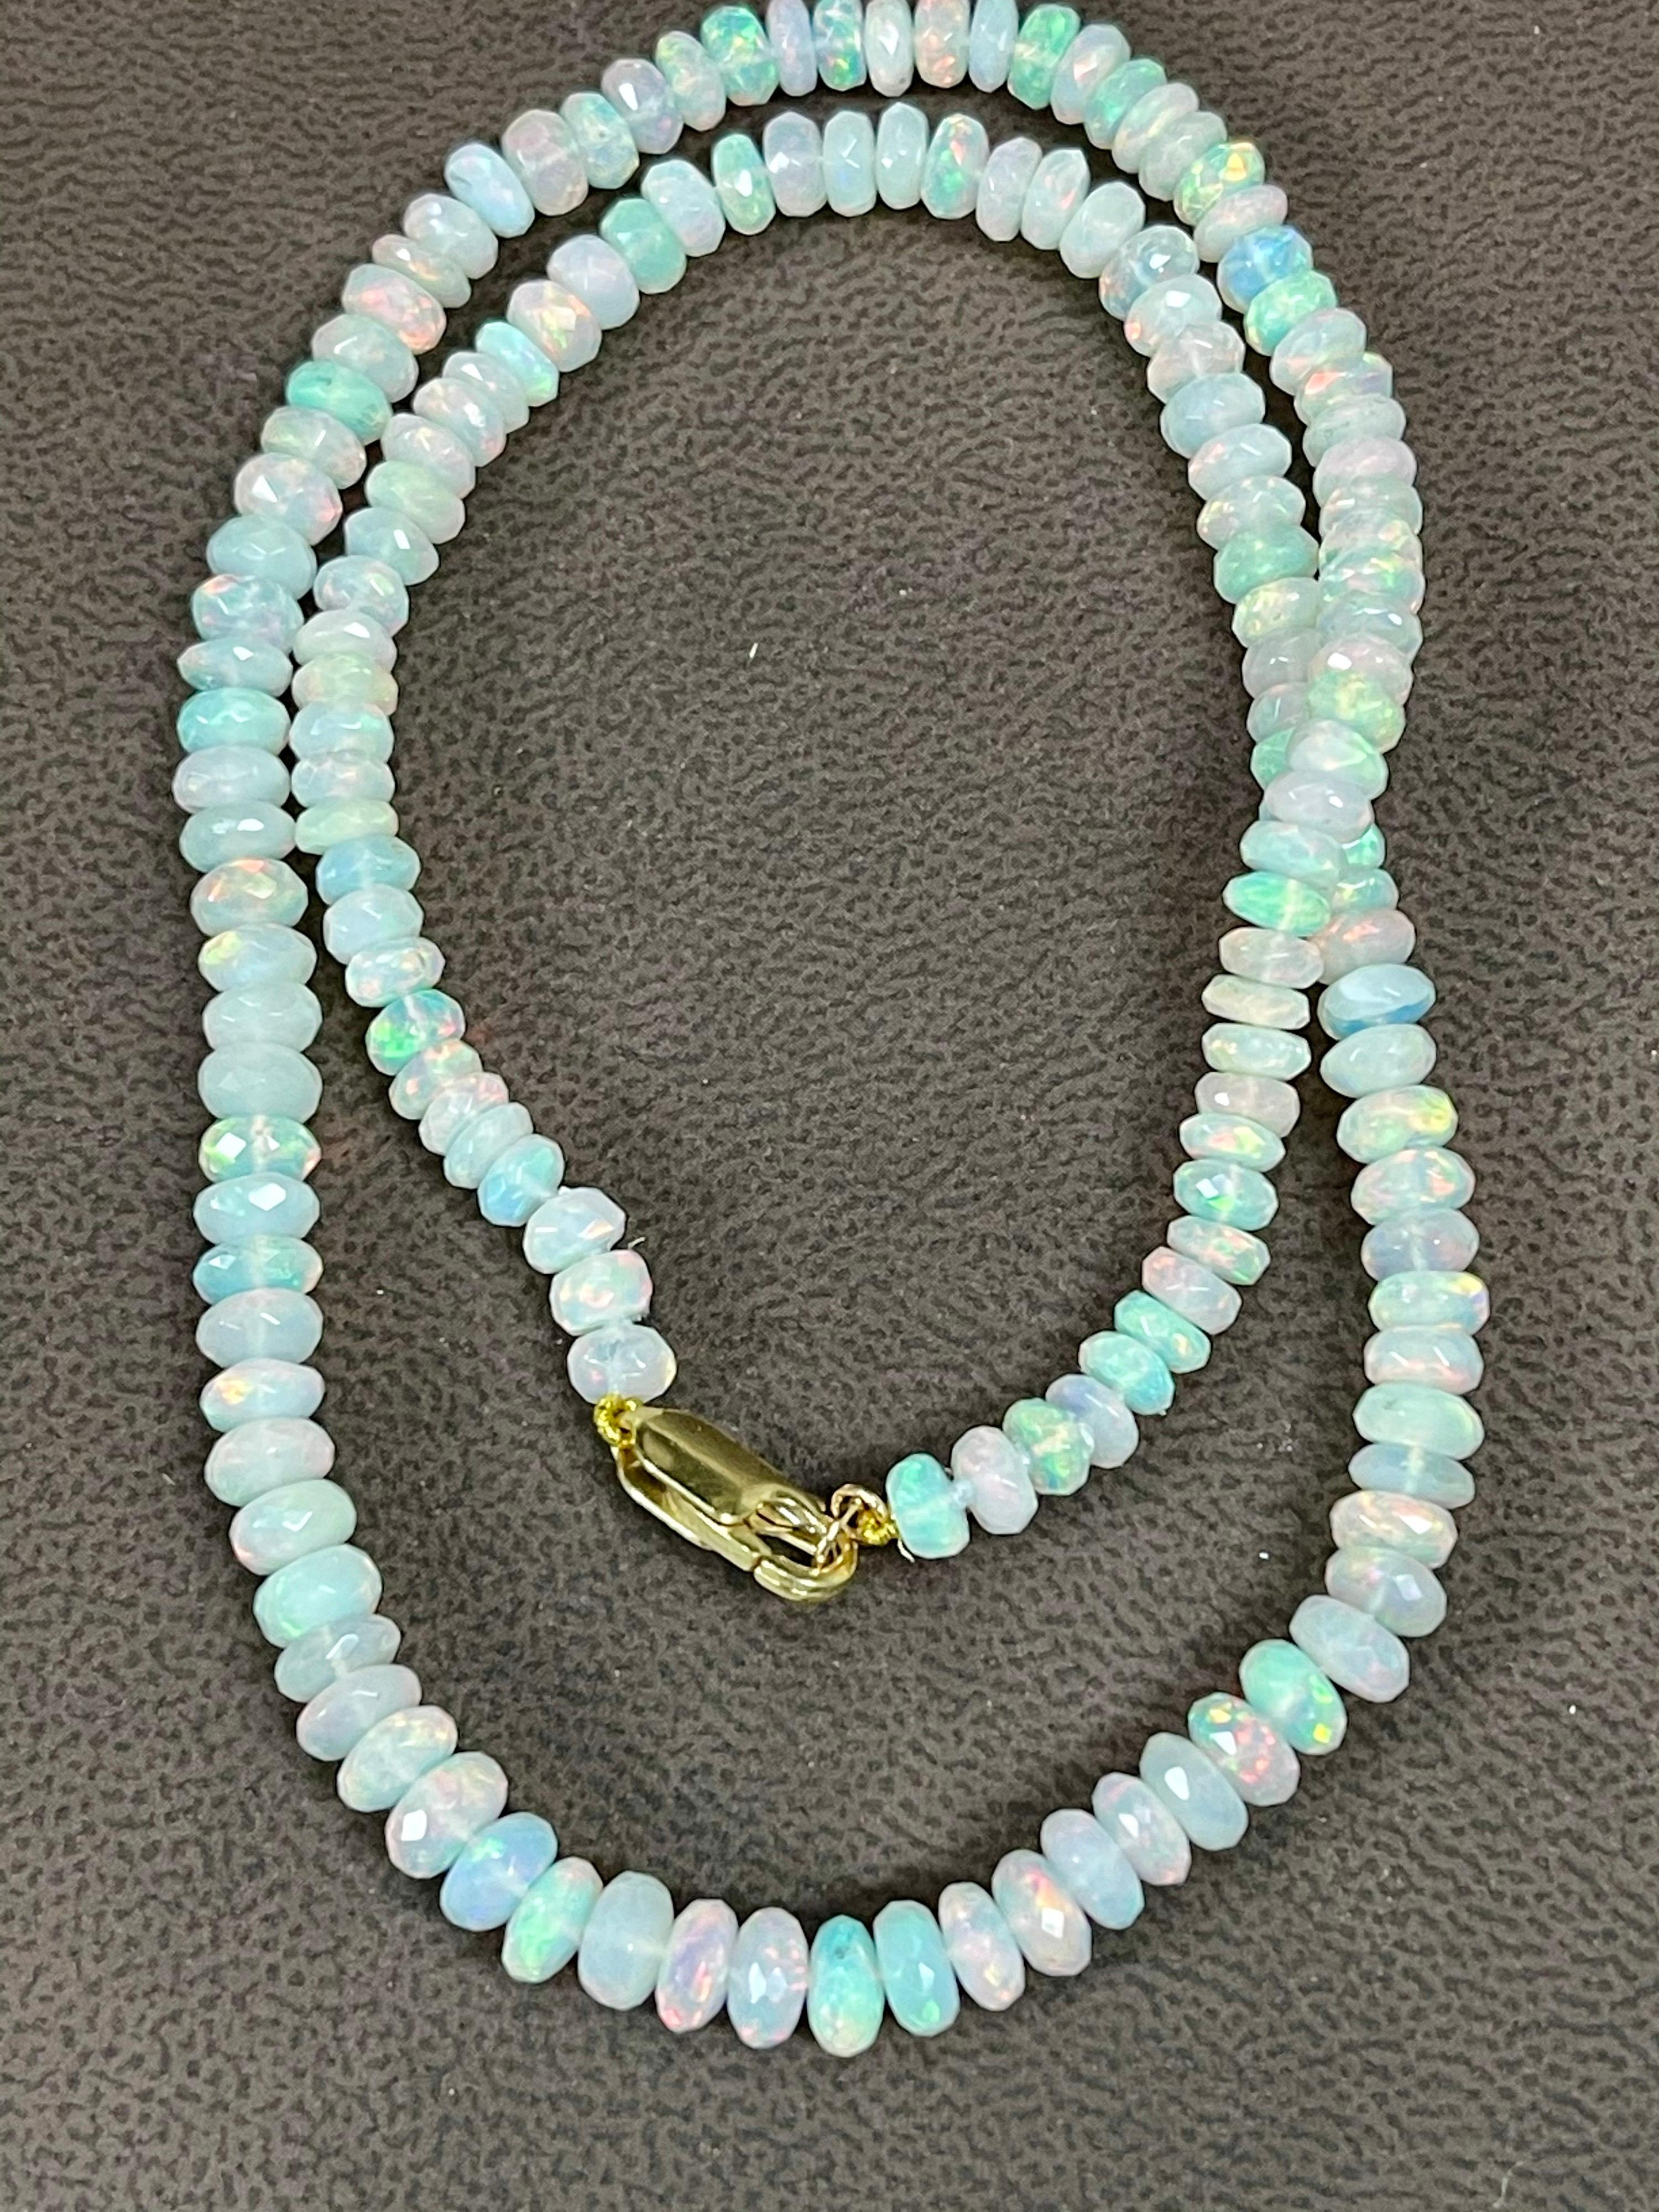  Natural Opal single strand Bead Necklace with heavy 14 Karat yellow  gold clasp
17